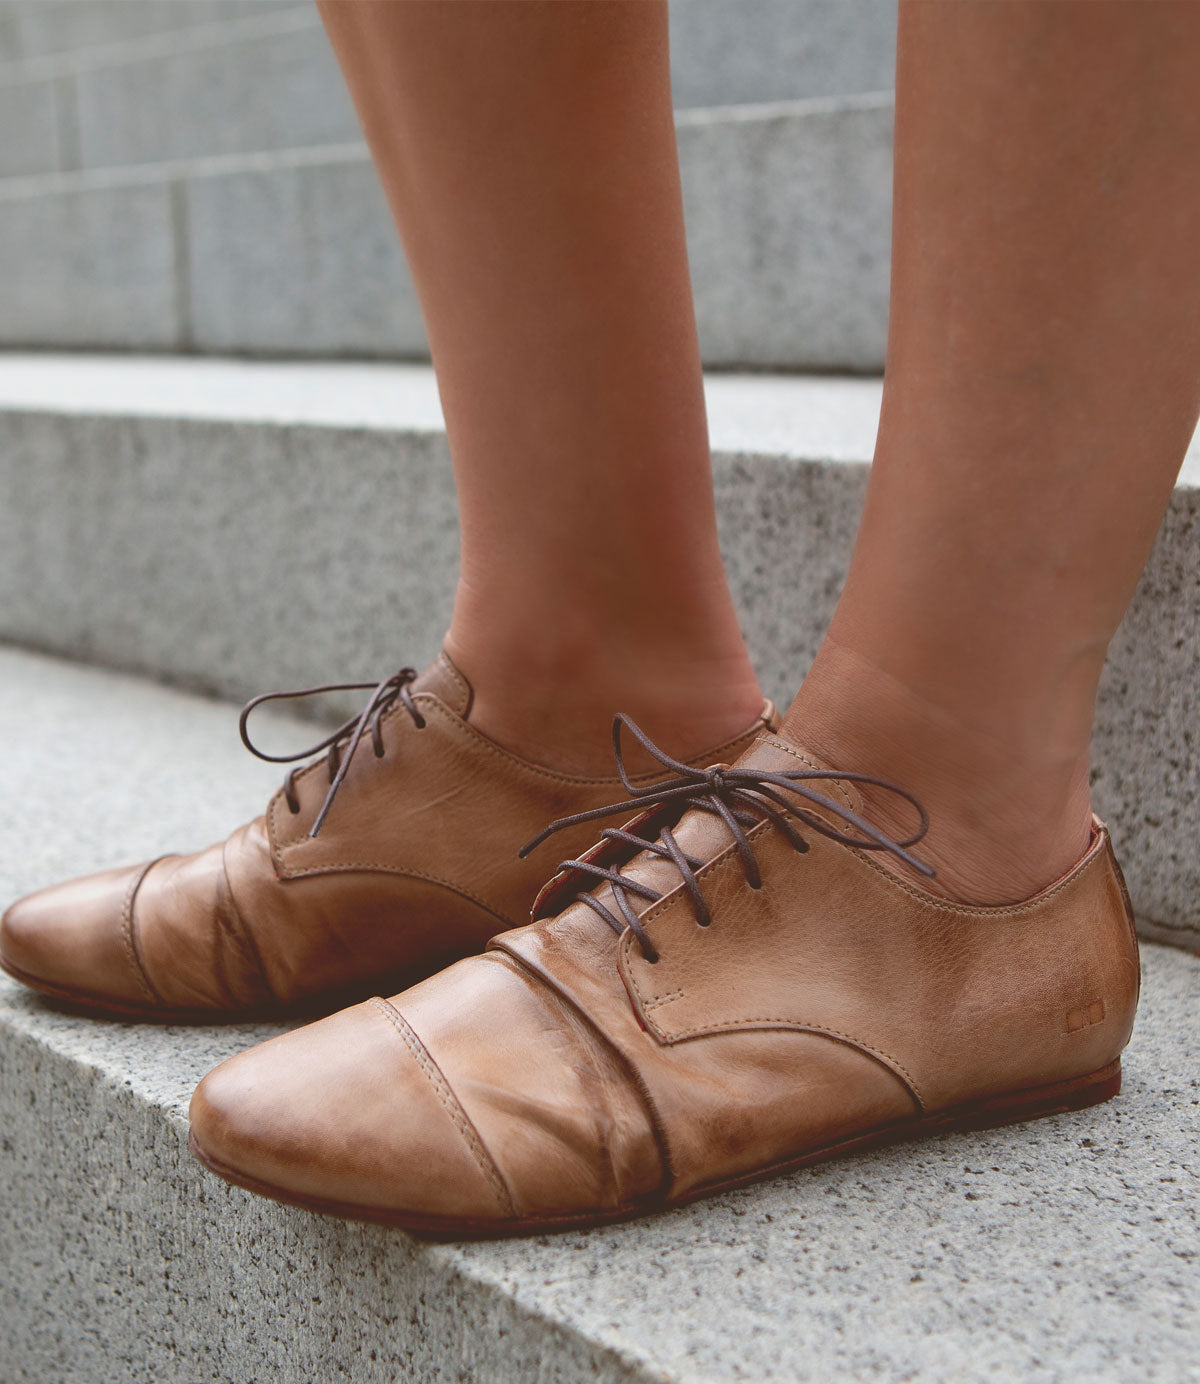 A person wearing brown lace-up leather shoes stands on a set of concrete steps, exuding a classic touch with their Bed Stu Rumba II ensemble.